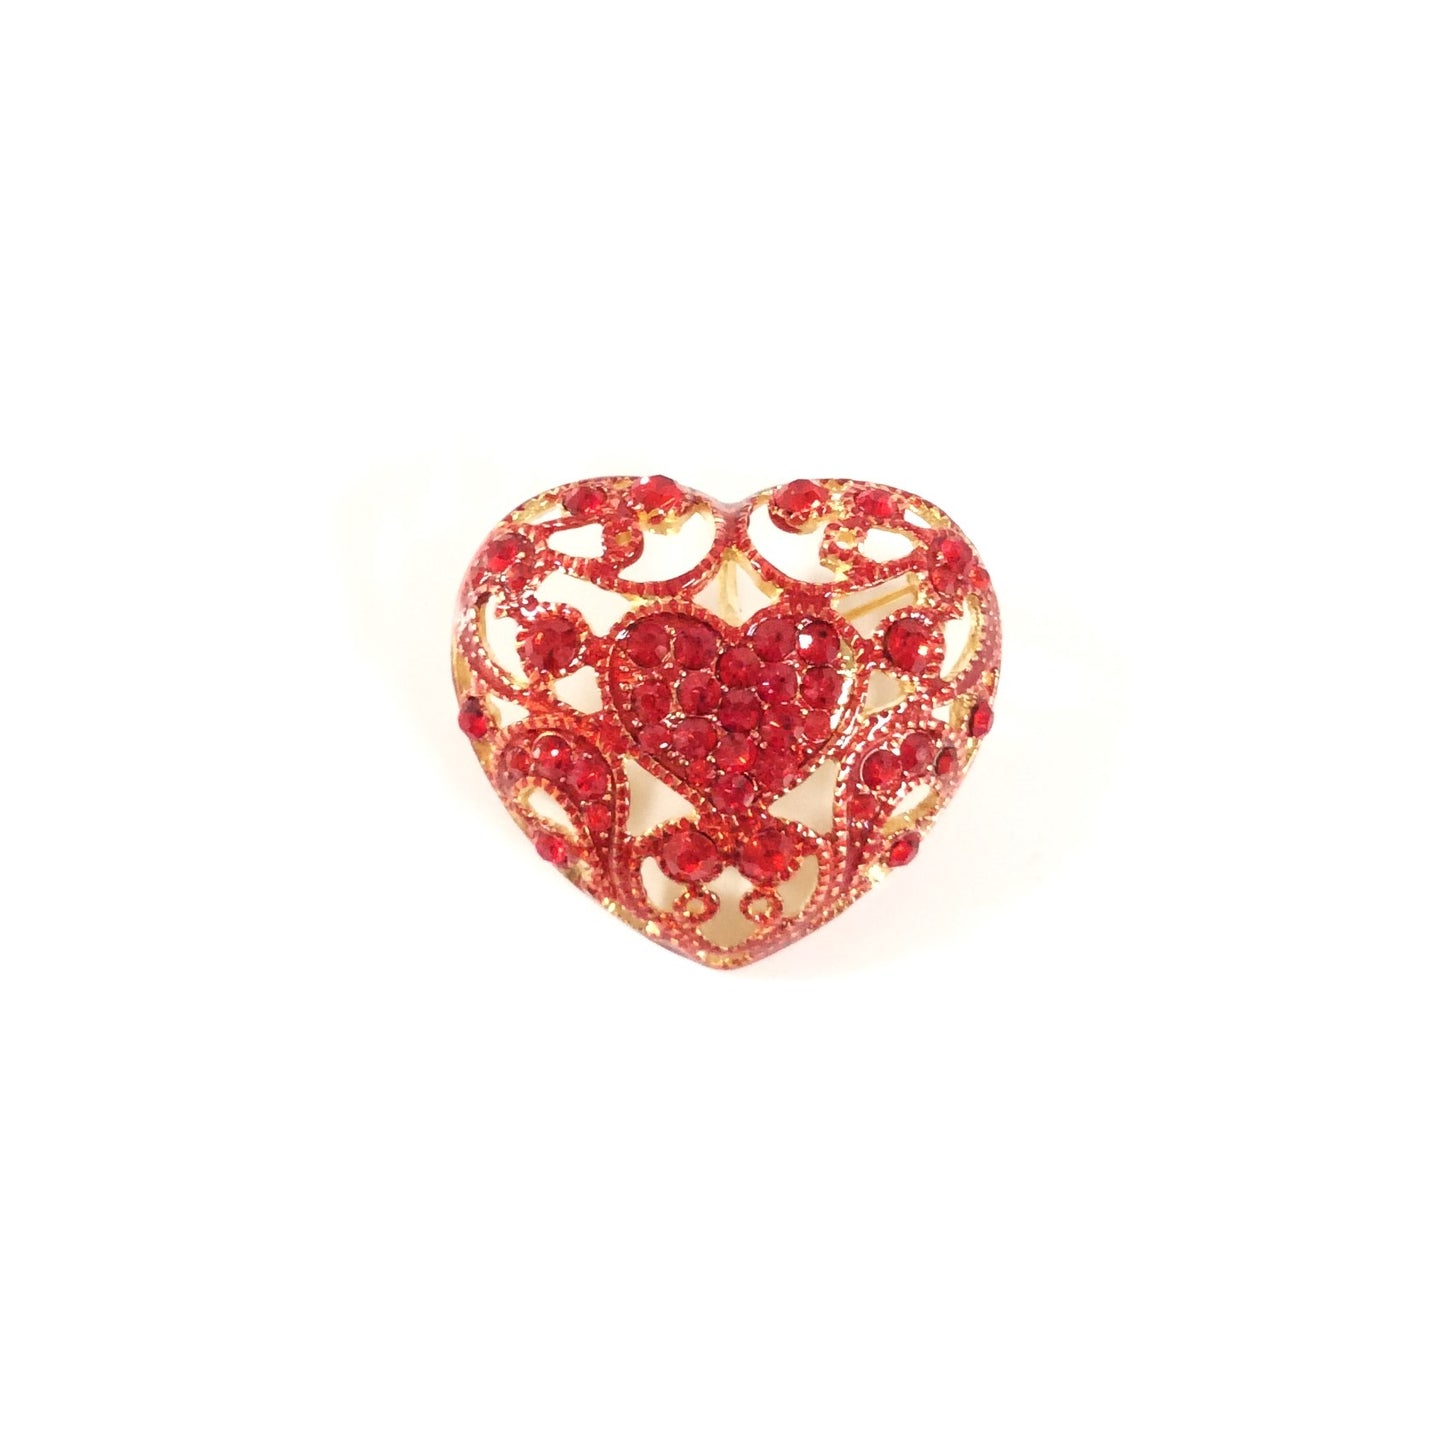 Heart Pin #19-101551 (Gold/Red)